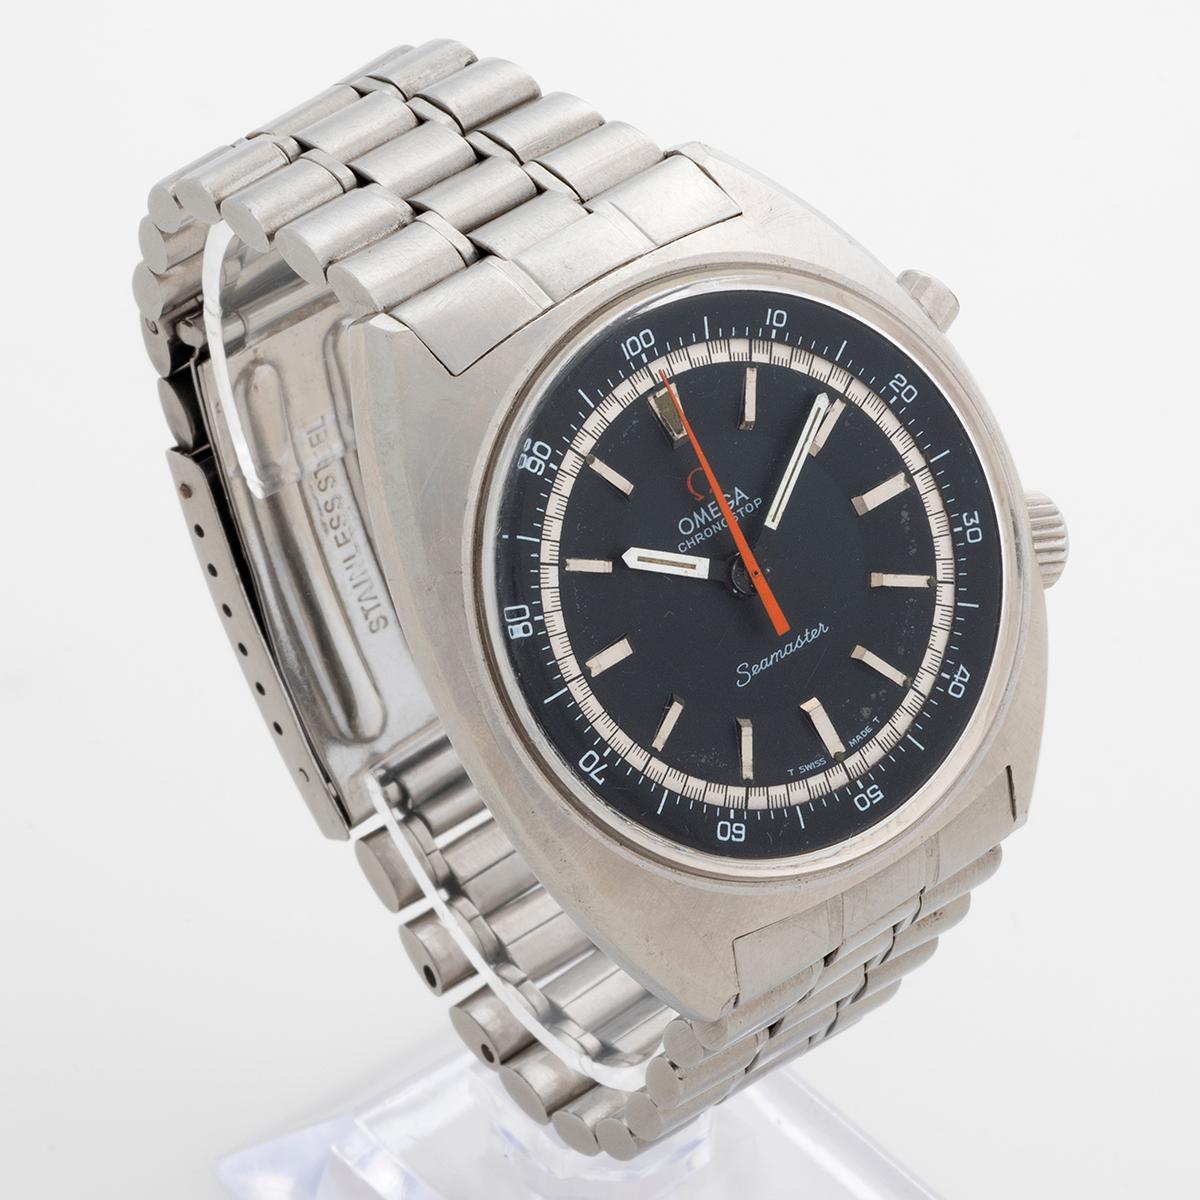 A rare reference, our Omega Seamaster Chronostop reference 145.007 was designed for motorsport, with a continually counting seconds function (when activated) and fitted in a 41mm case. This particular example features an original dial and hands, an